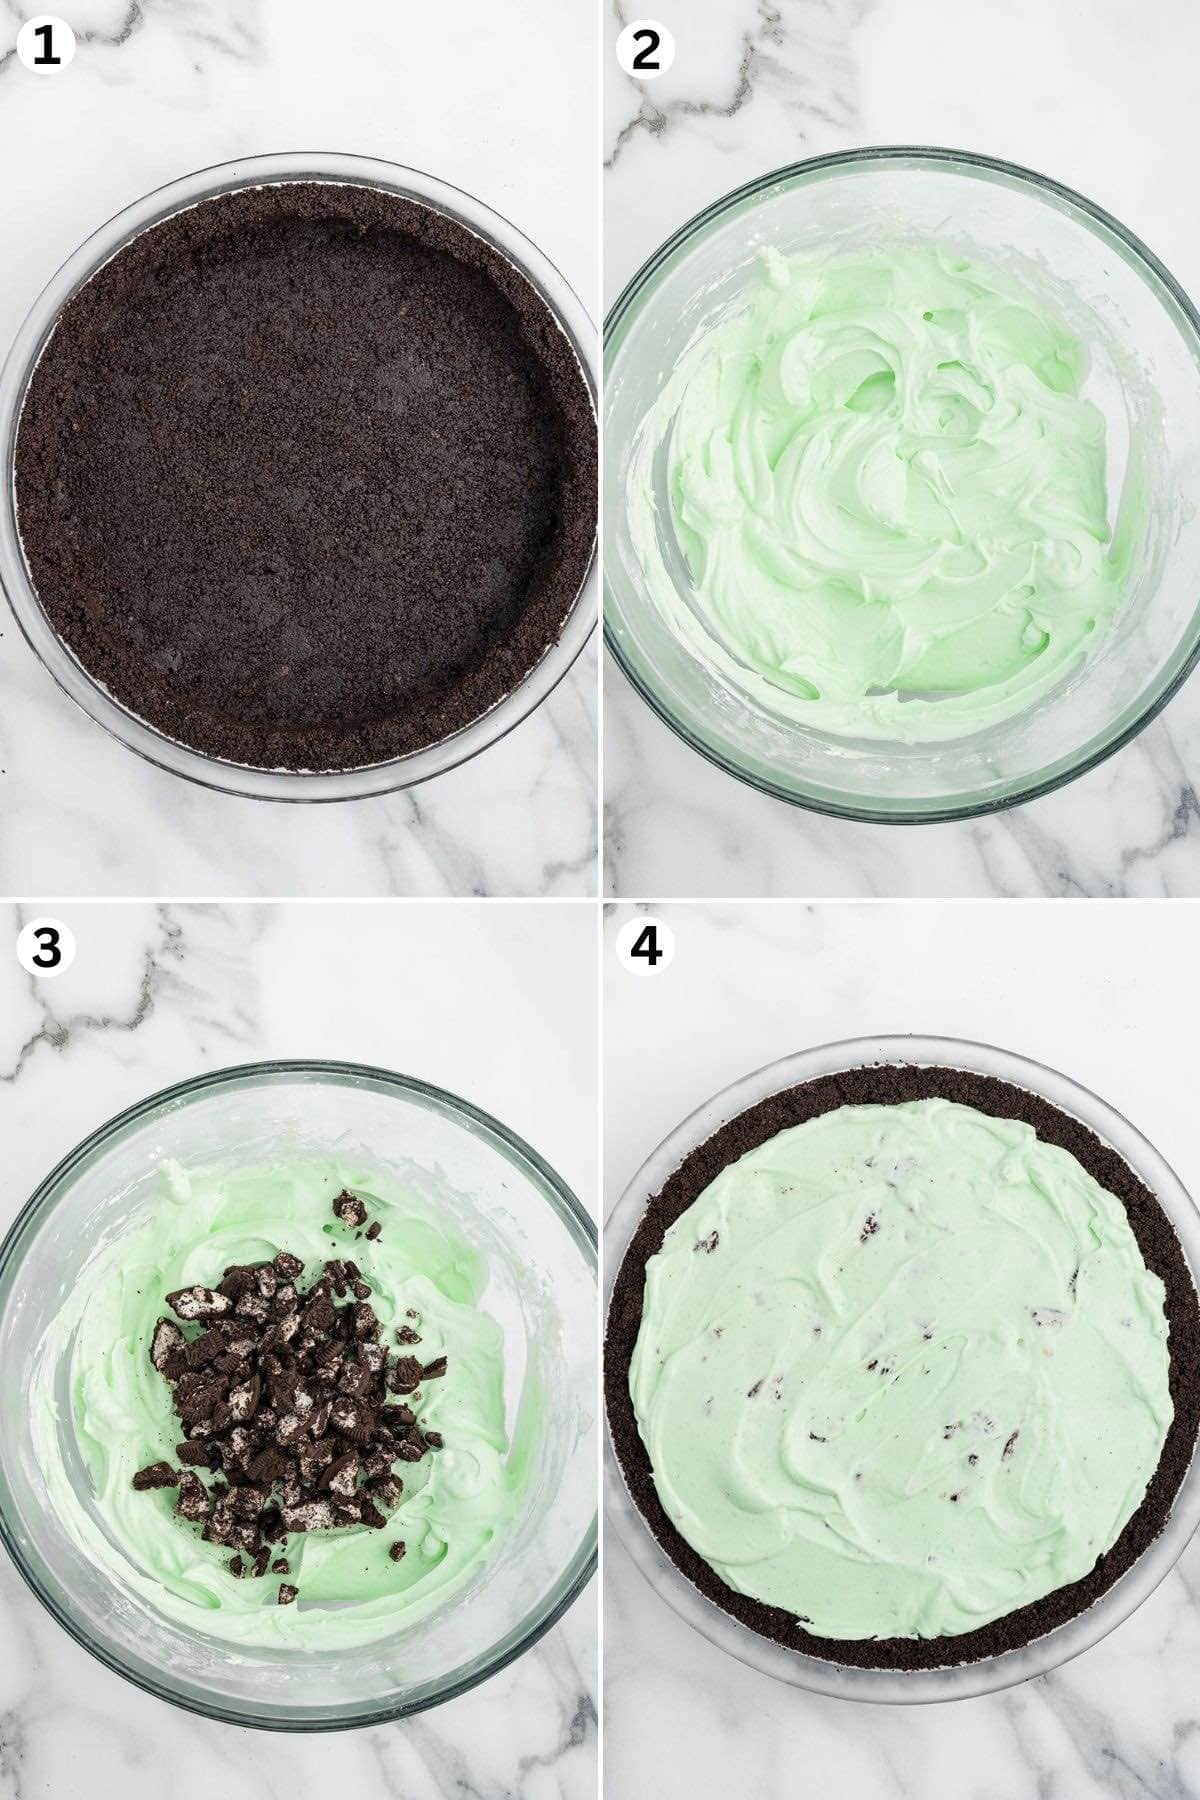 Press the cookie crumbs into the pie dish to form a chocolate cookie crust. Make the mint chocolate mixture. Fold in the crushed cookies. Spread the mint chocolate pie filling into the crust.